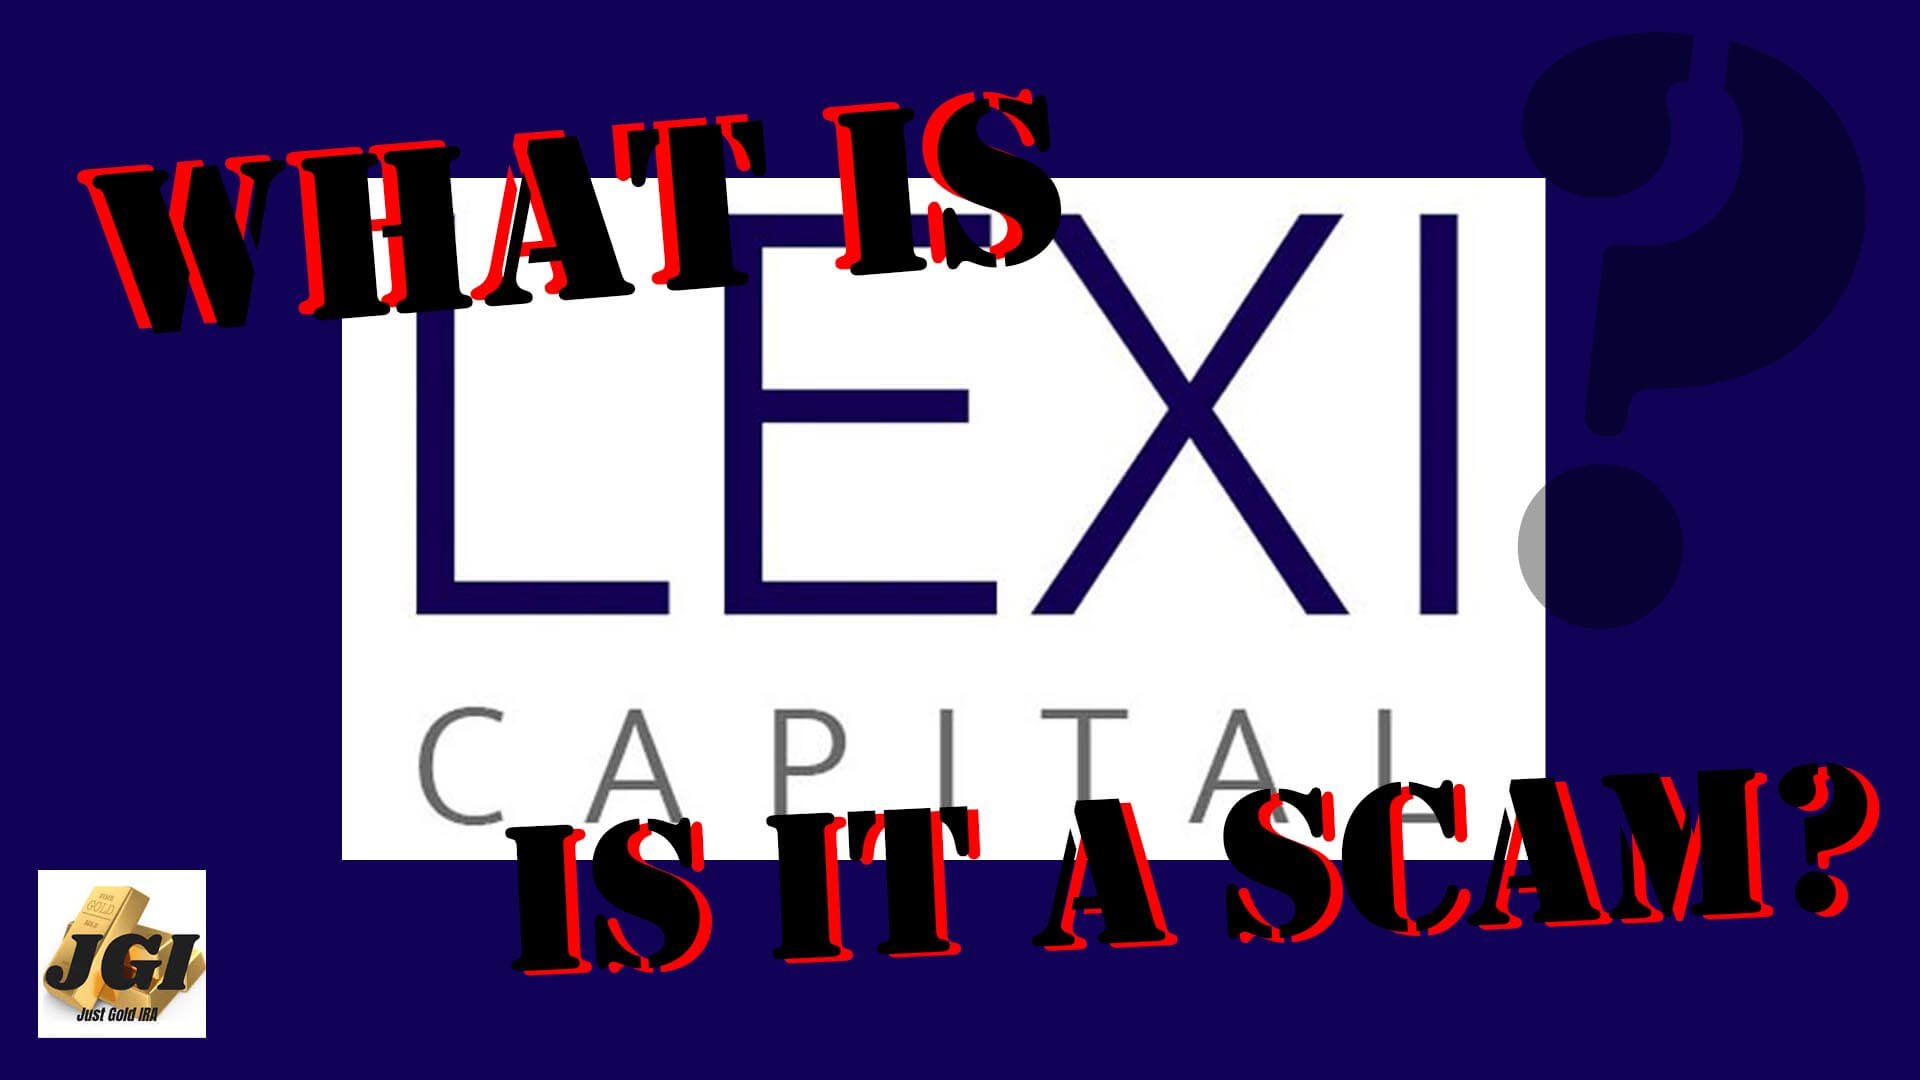 What is Lexi Capital